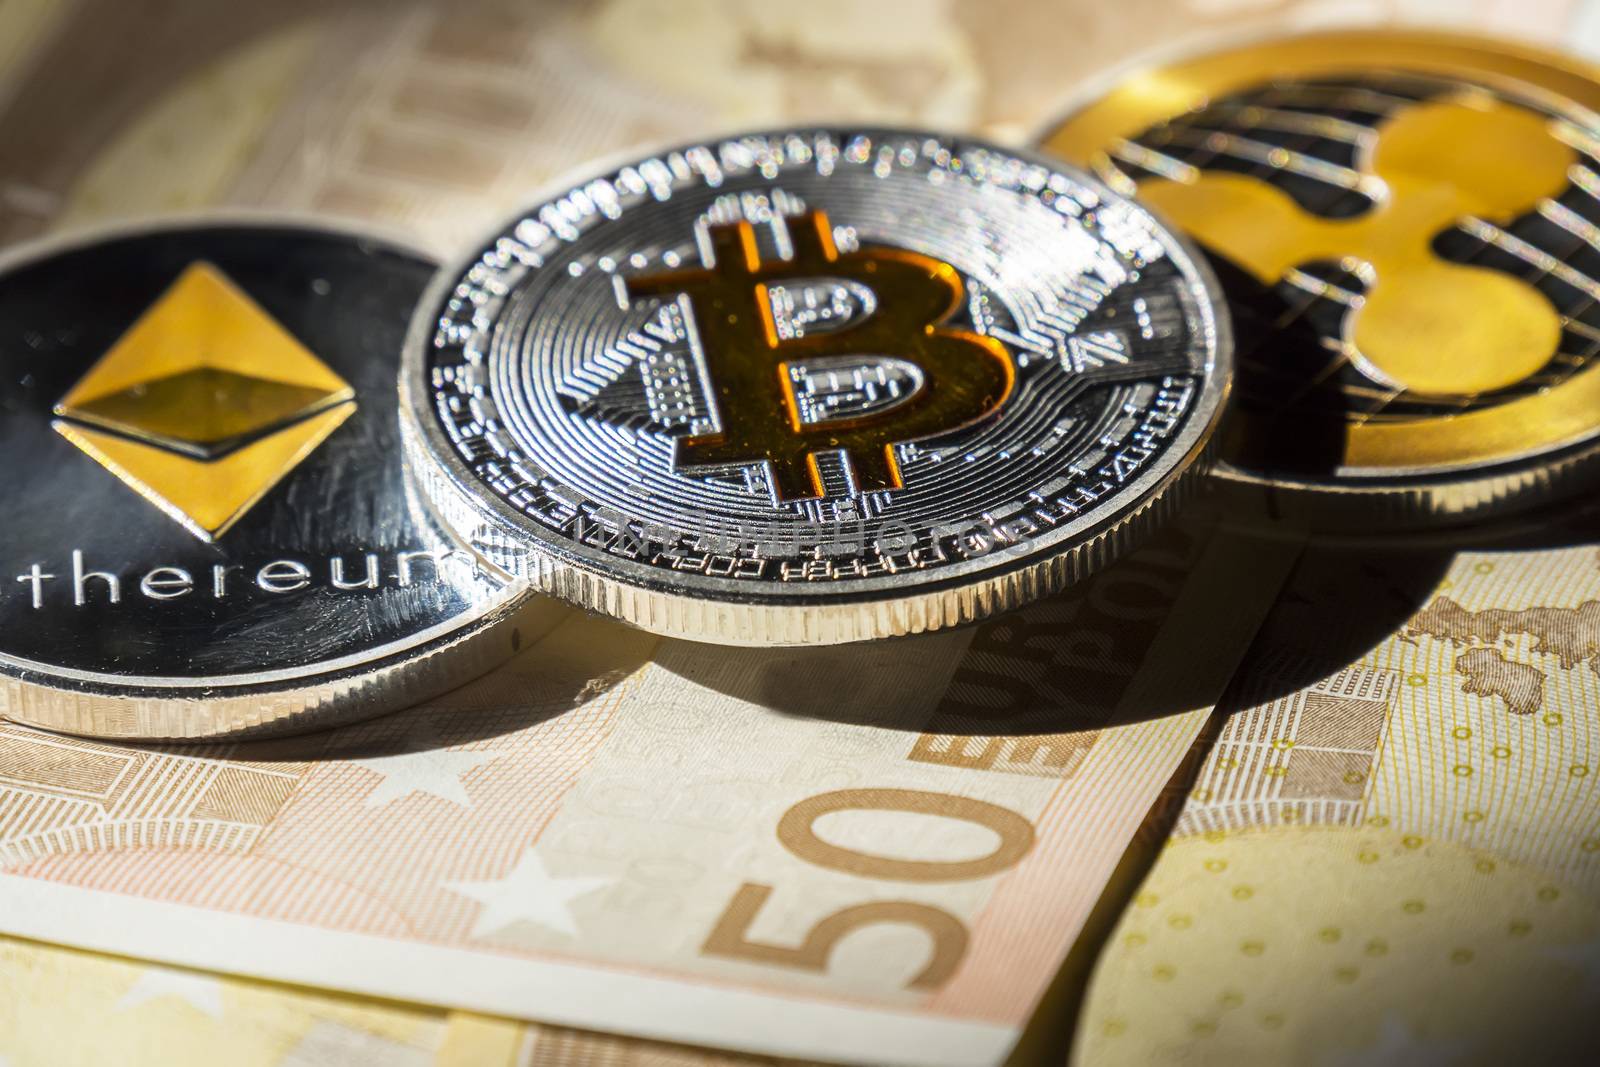 Cryptocurrency coins over euro banknotes; Bitcoin, Ethereum and Ripple coin